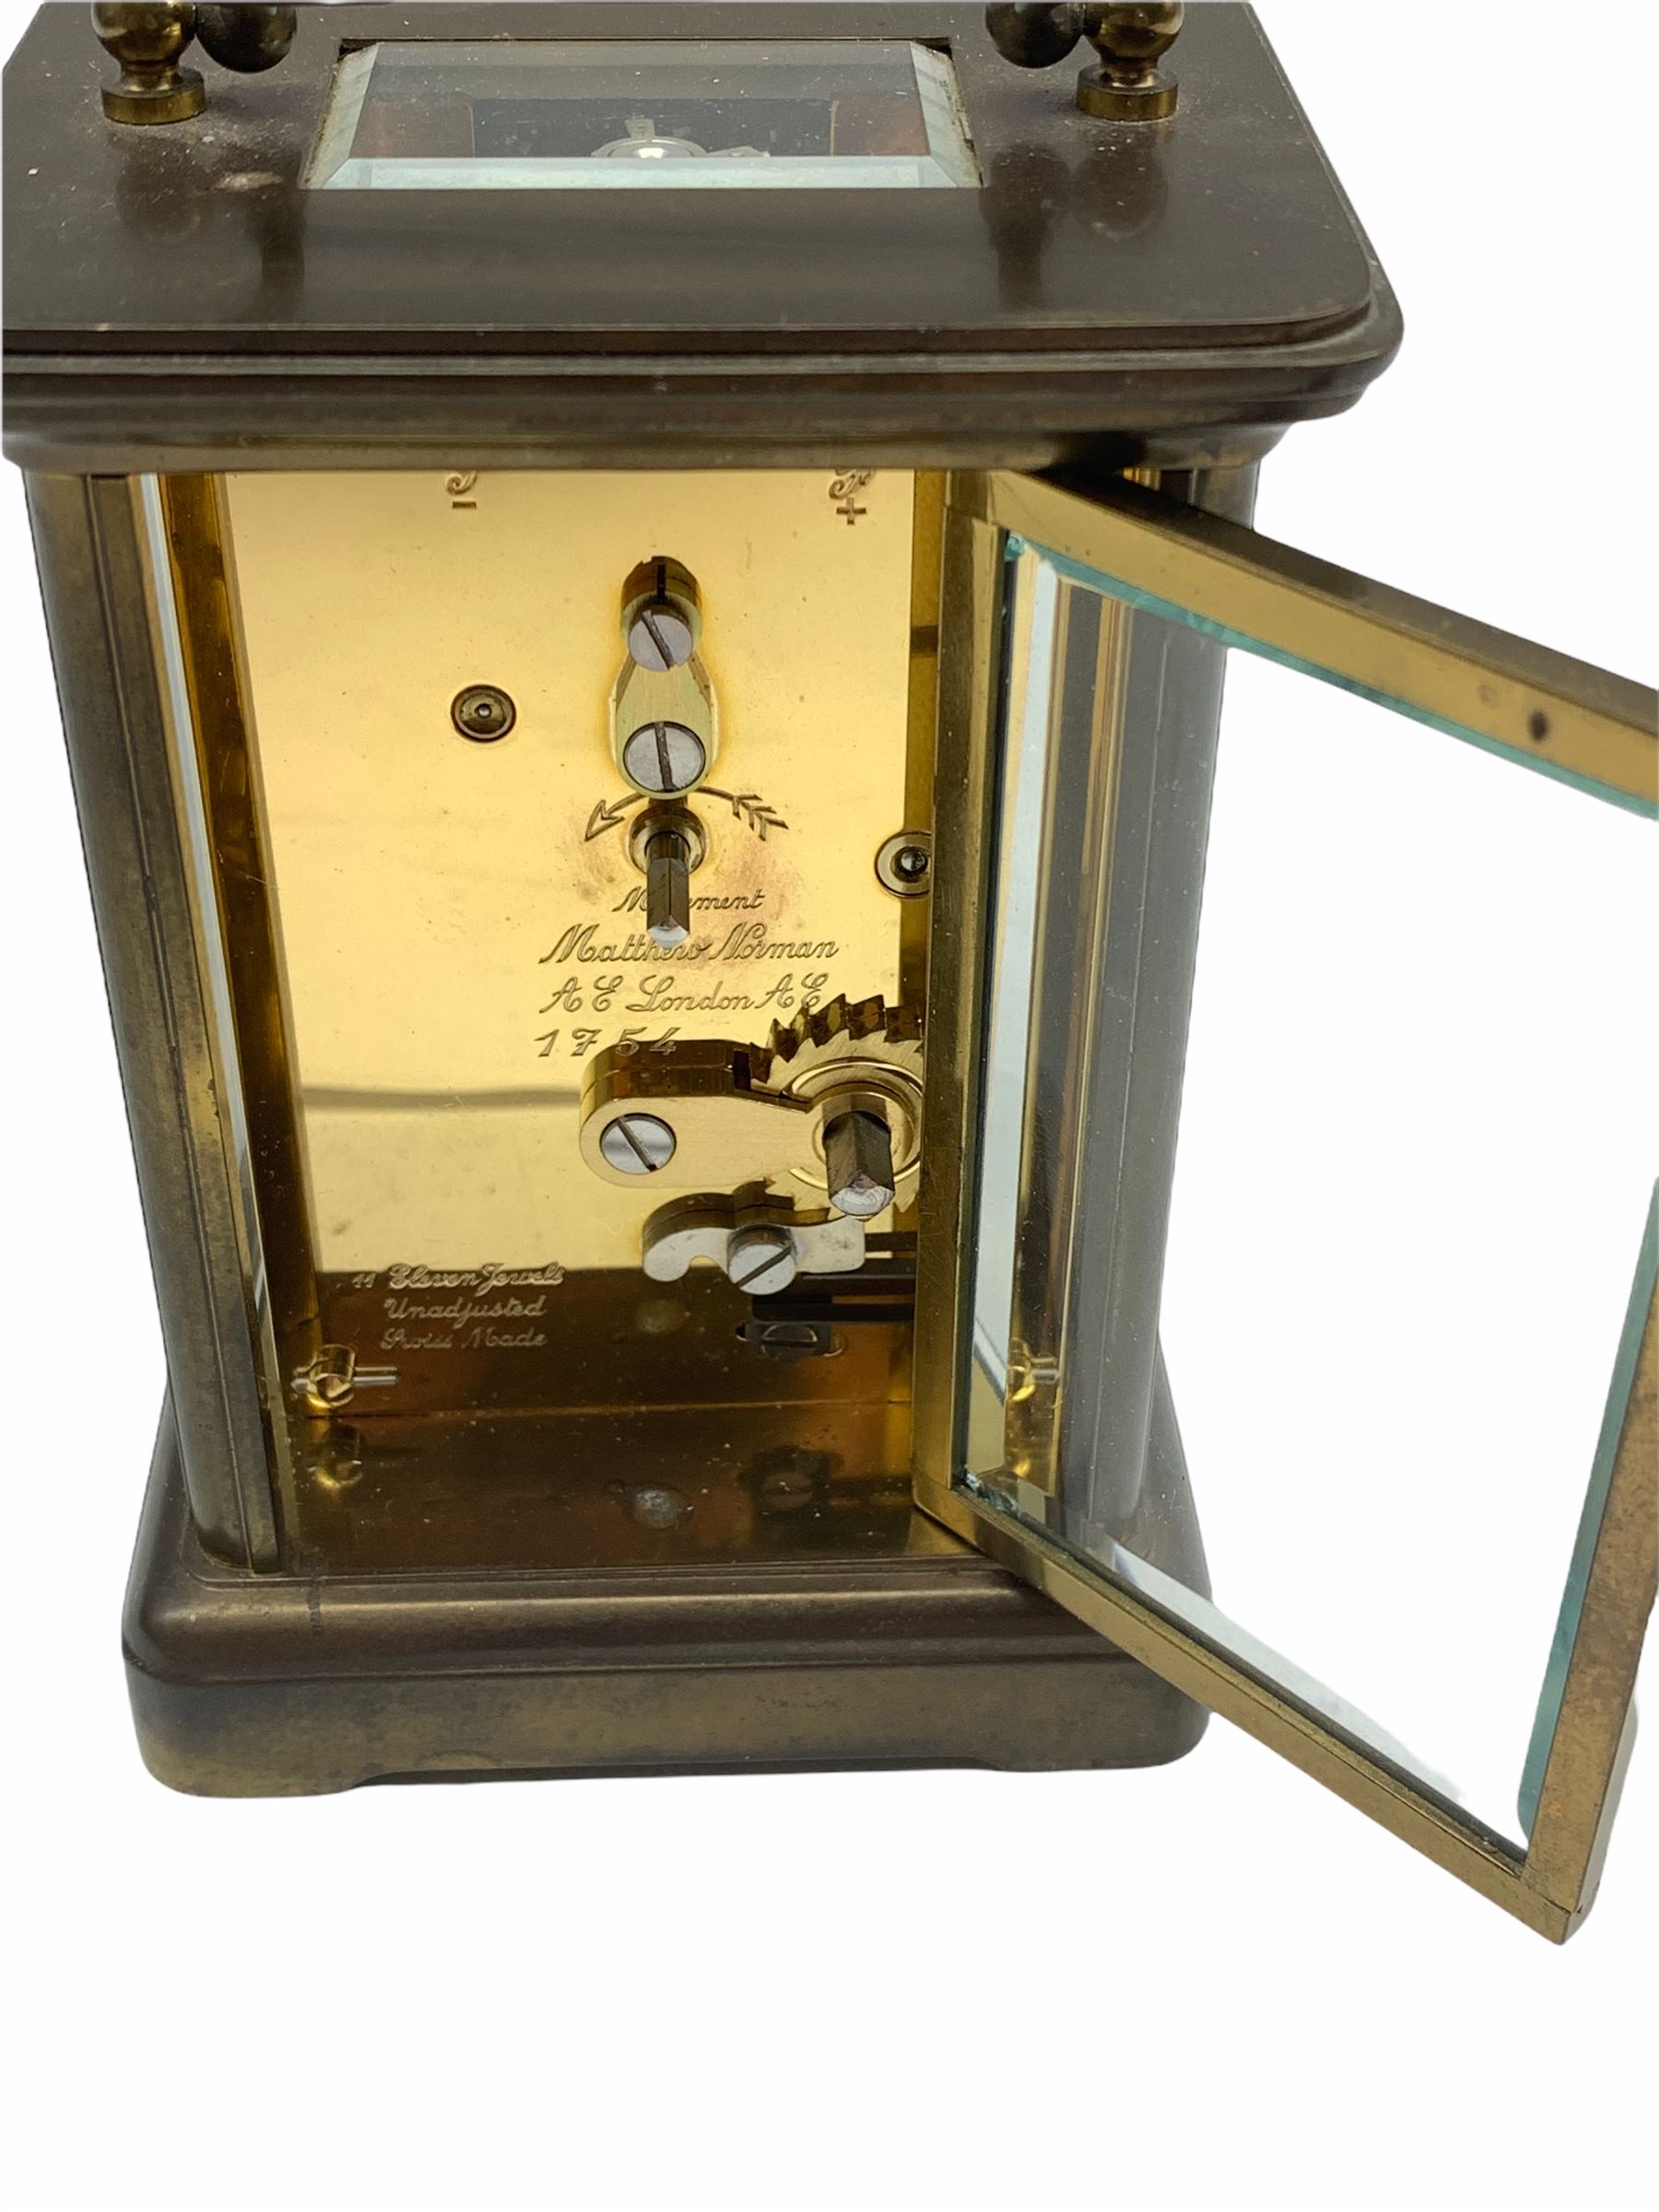 20th century Matthew Norman eight-day timepiece Carriage Clock with a lever platform escapement - Image 3 of 4